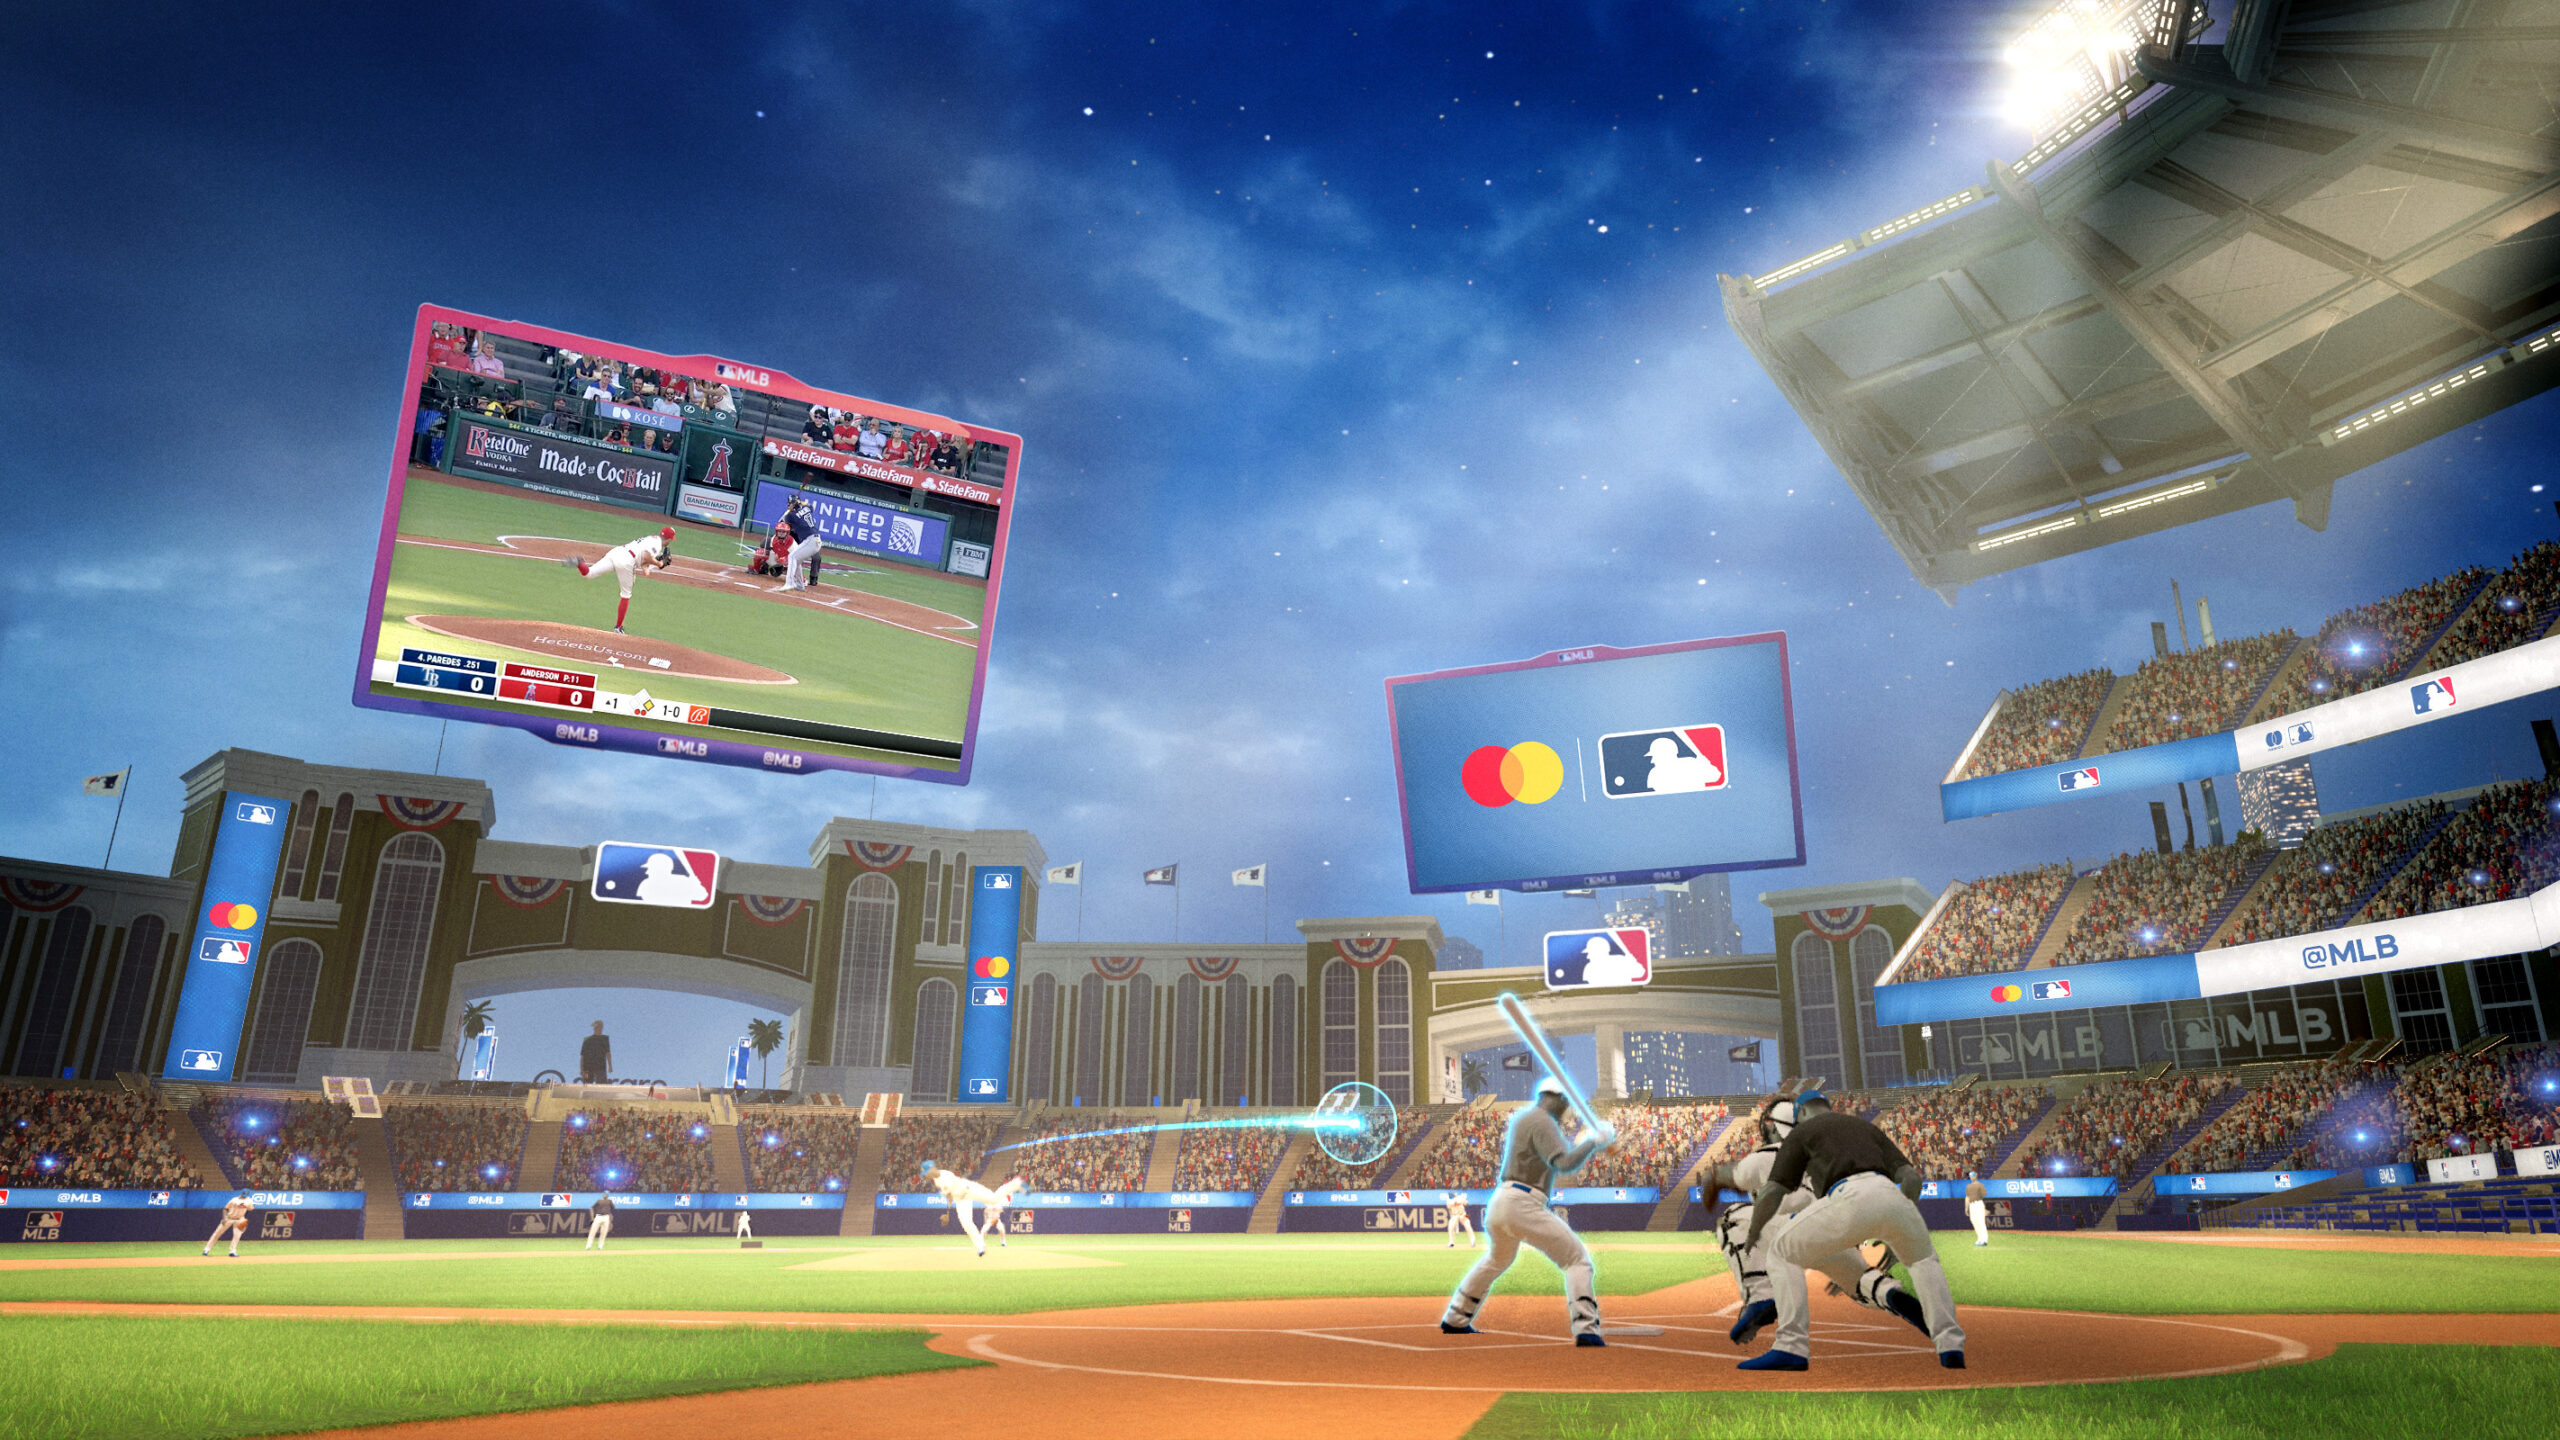 Major League Baseball to Host Latest “Virtual Ballpark” During Rays-Angels Game on Sept